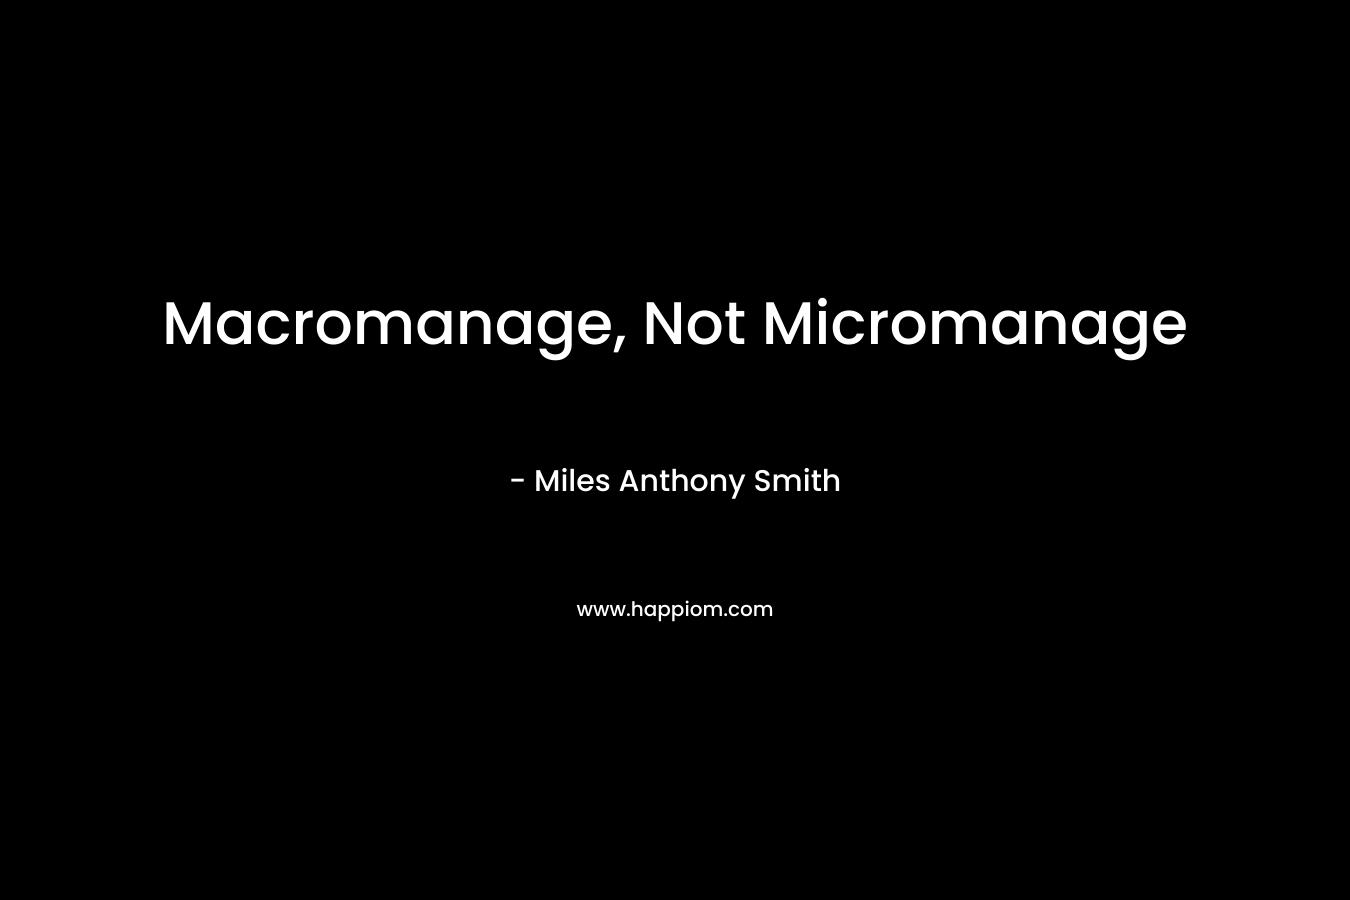 Macromanage, Not Micromanage